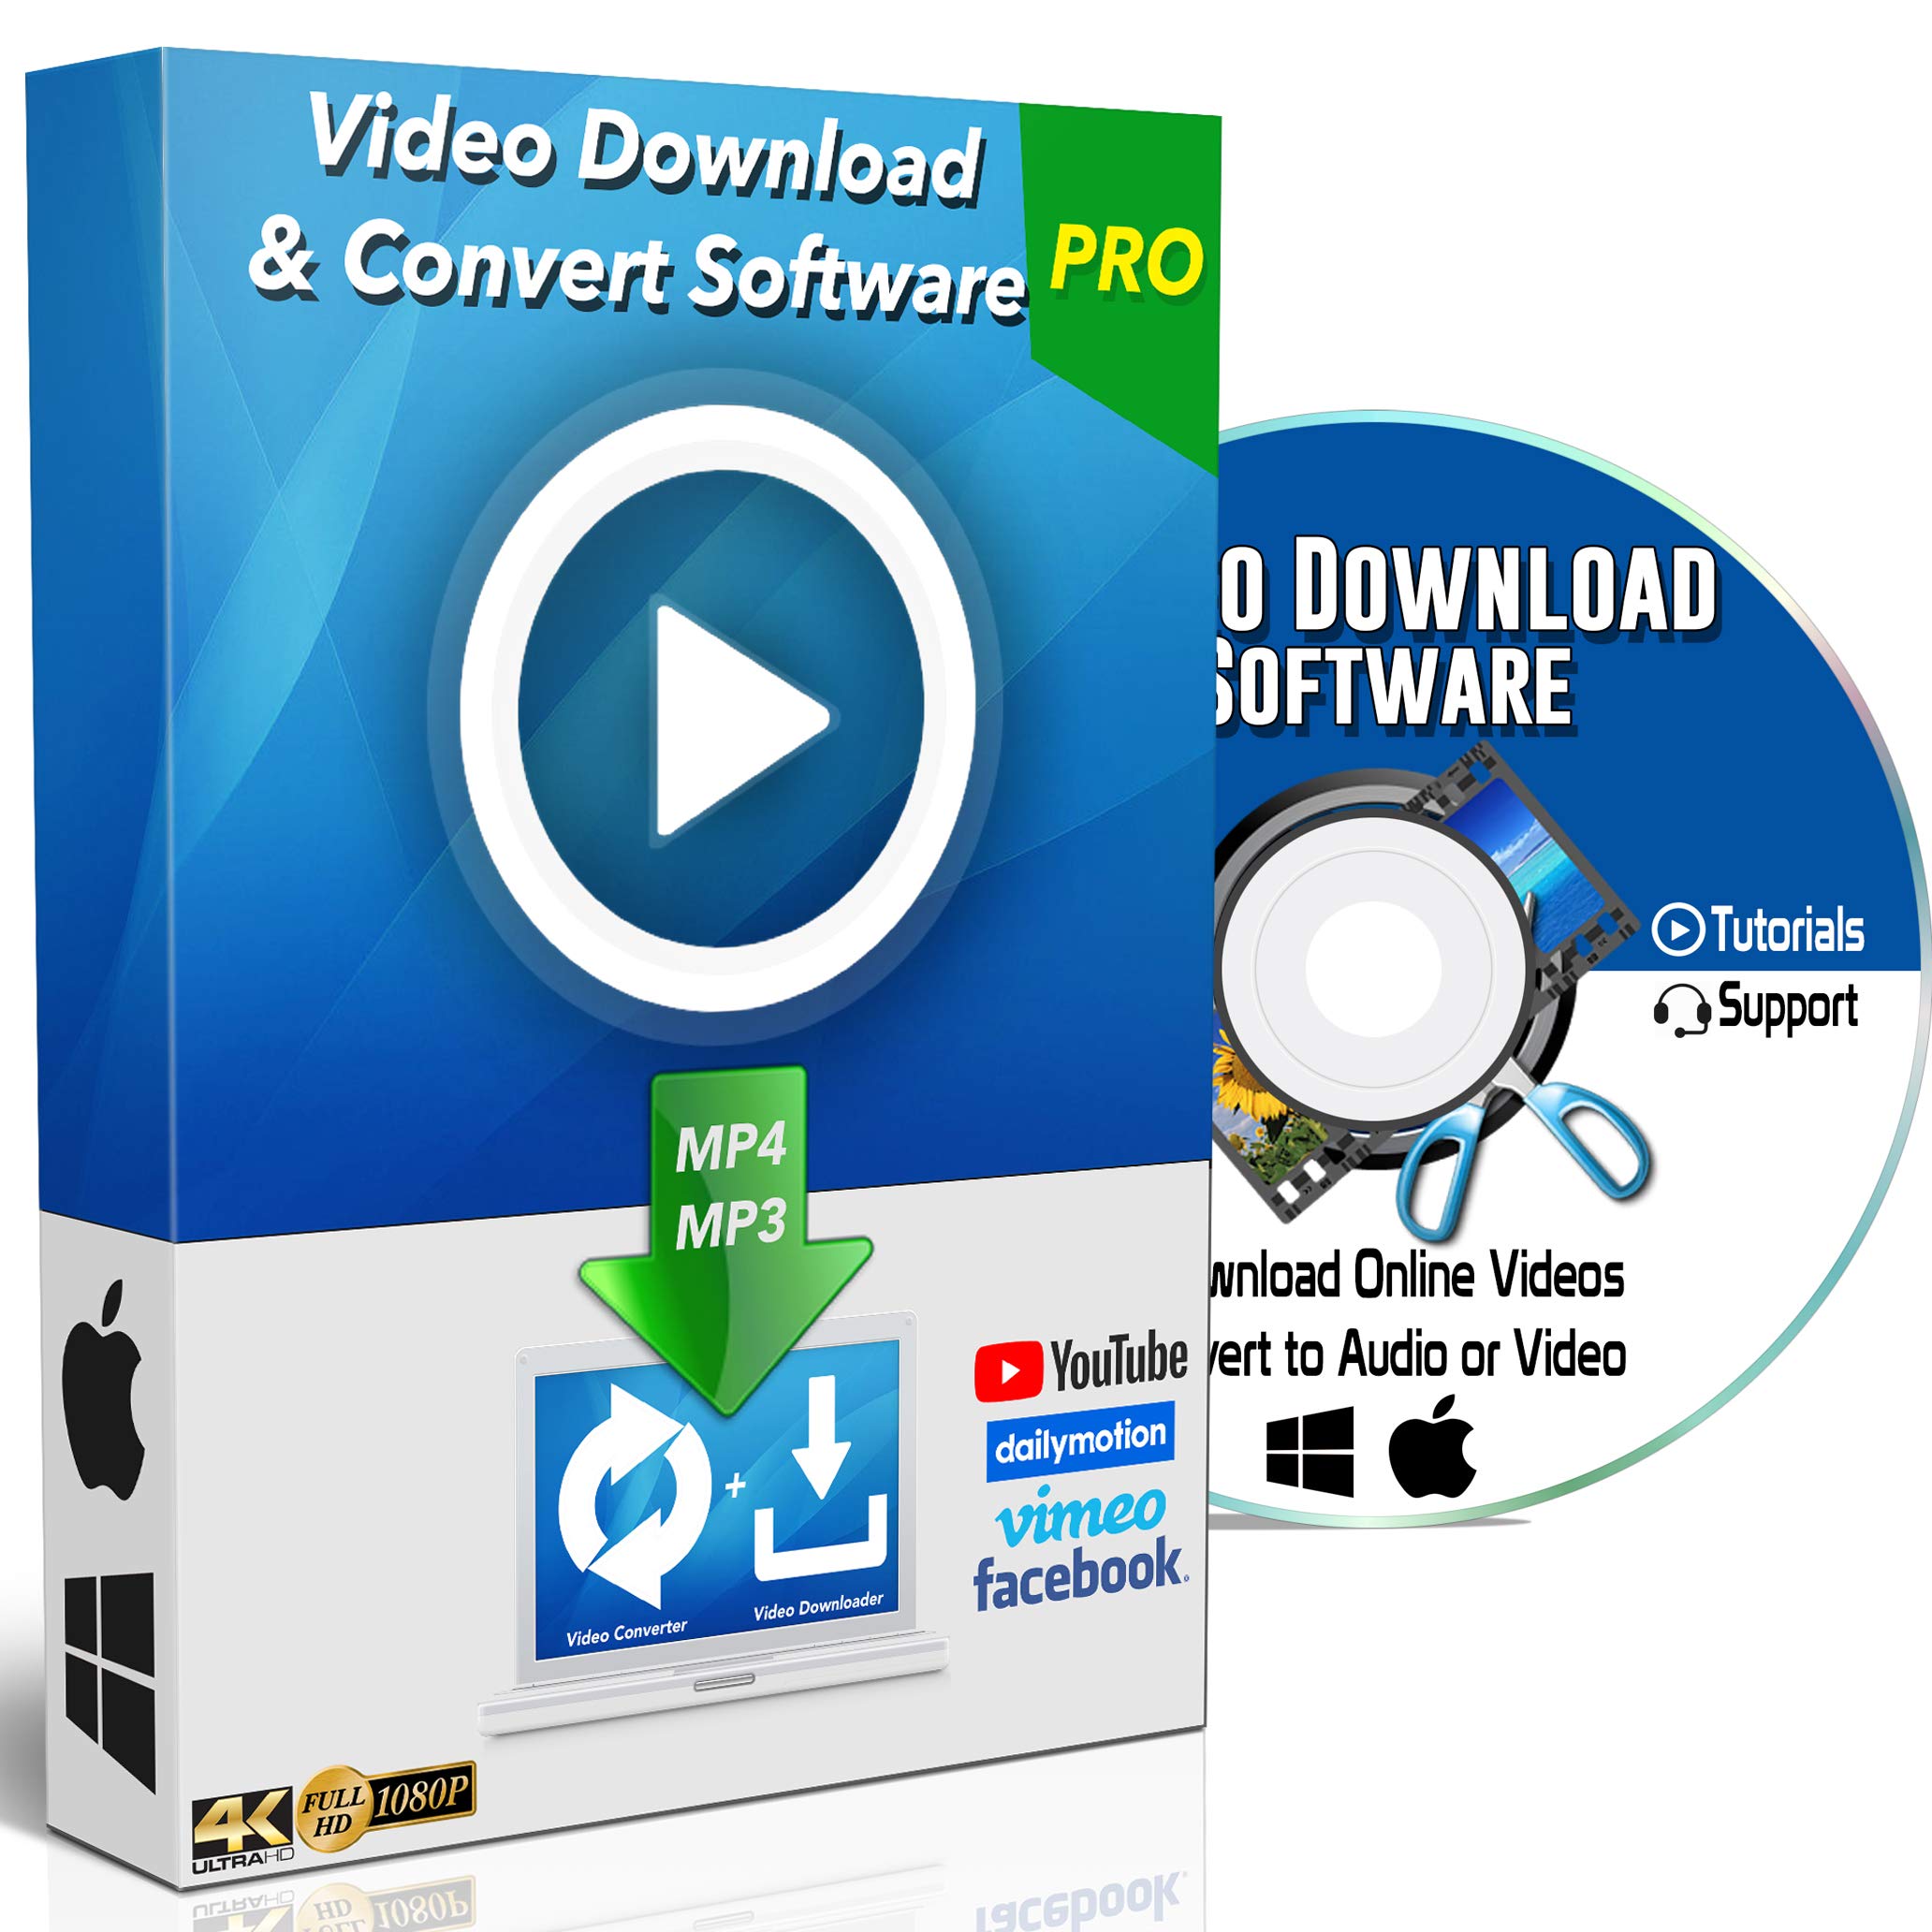 Download Video From Internet On Mac